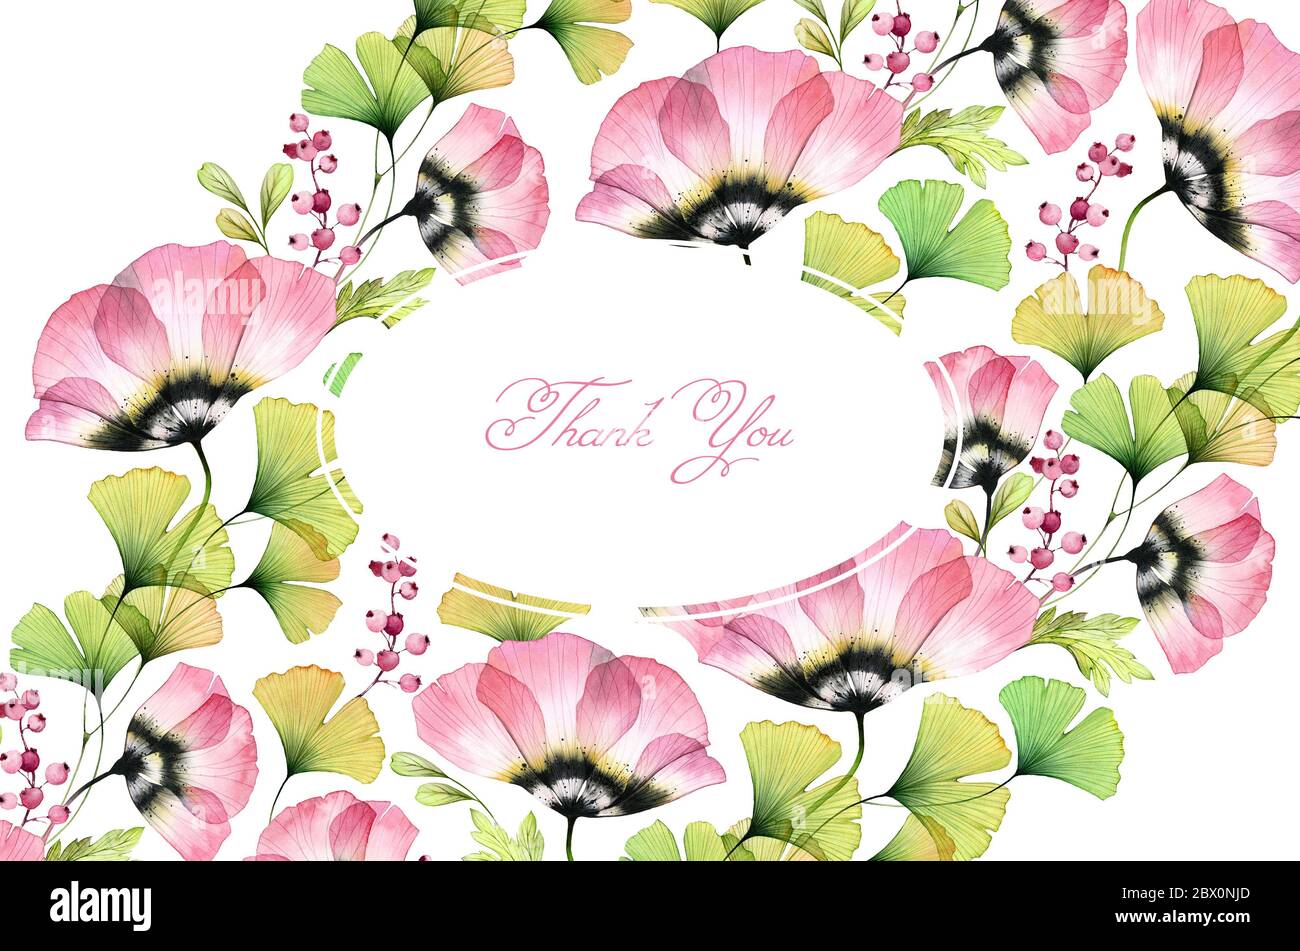 Watercolor floral background. Big field flowers, tulips, gingko leaves. Horizontal Thank you Card template with place for custom text Stock Photo